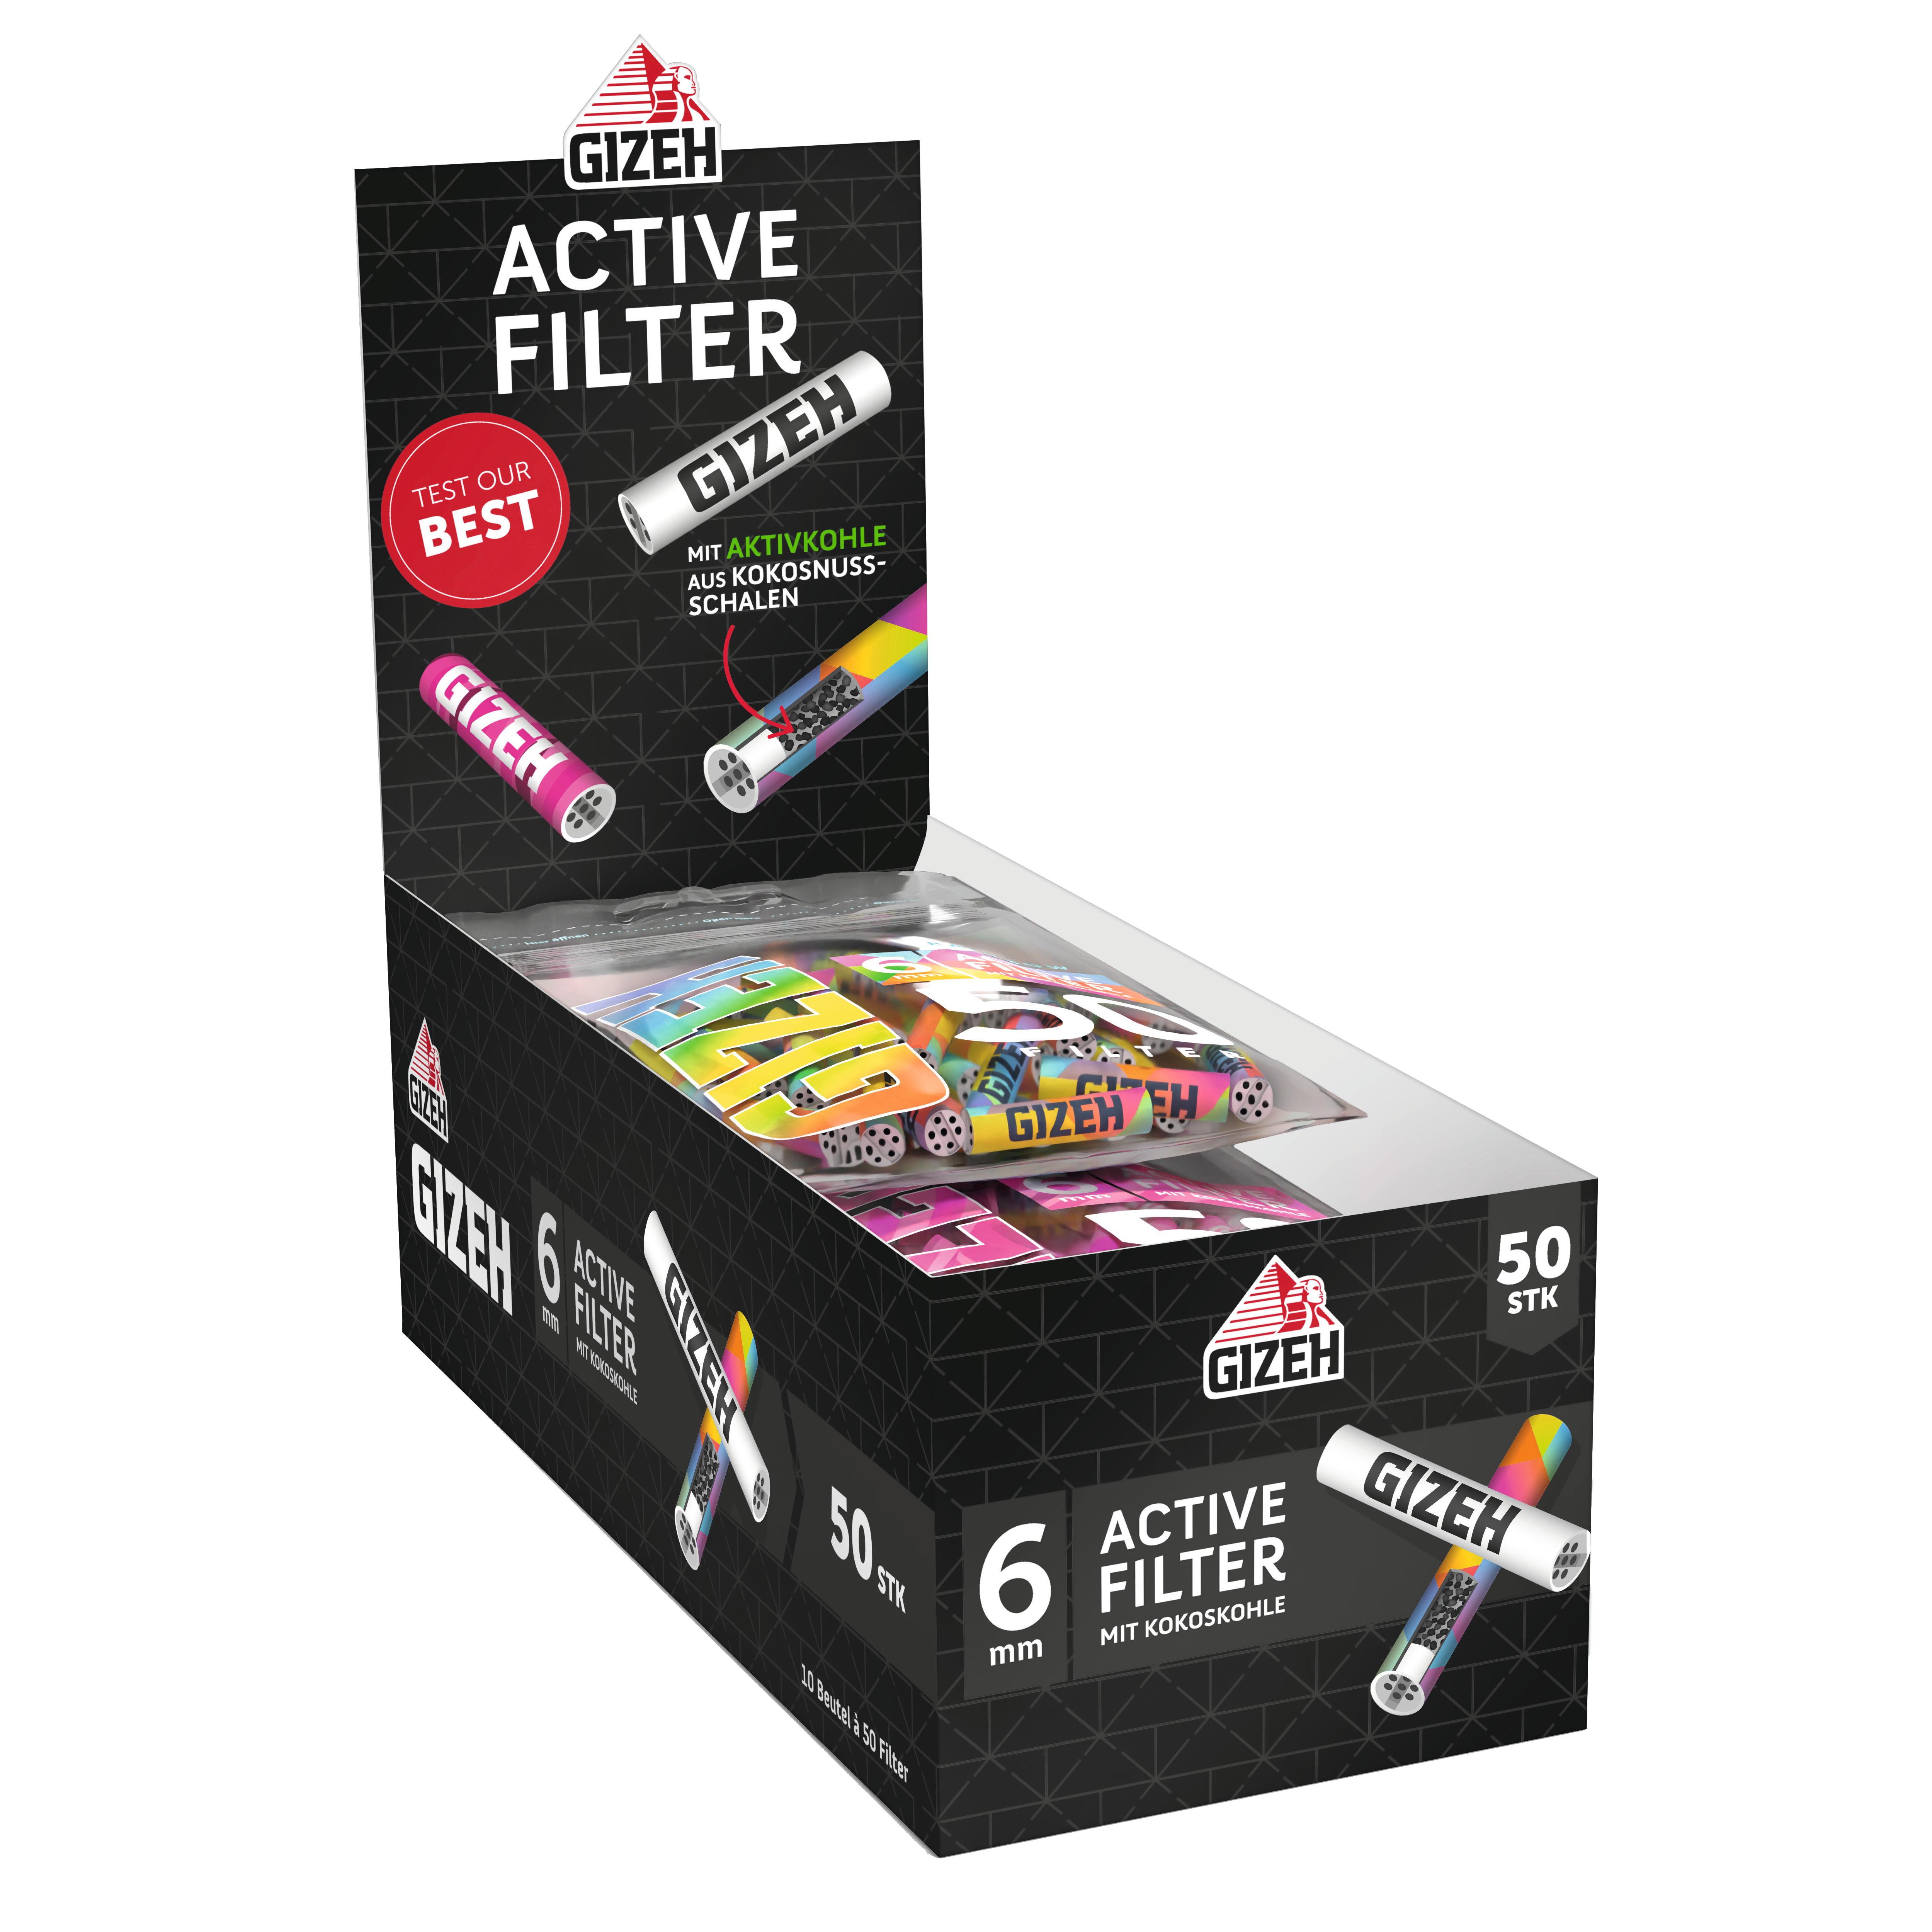 Gizeh Active Filter 1 Packung